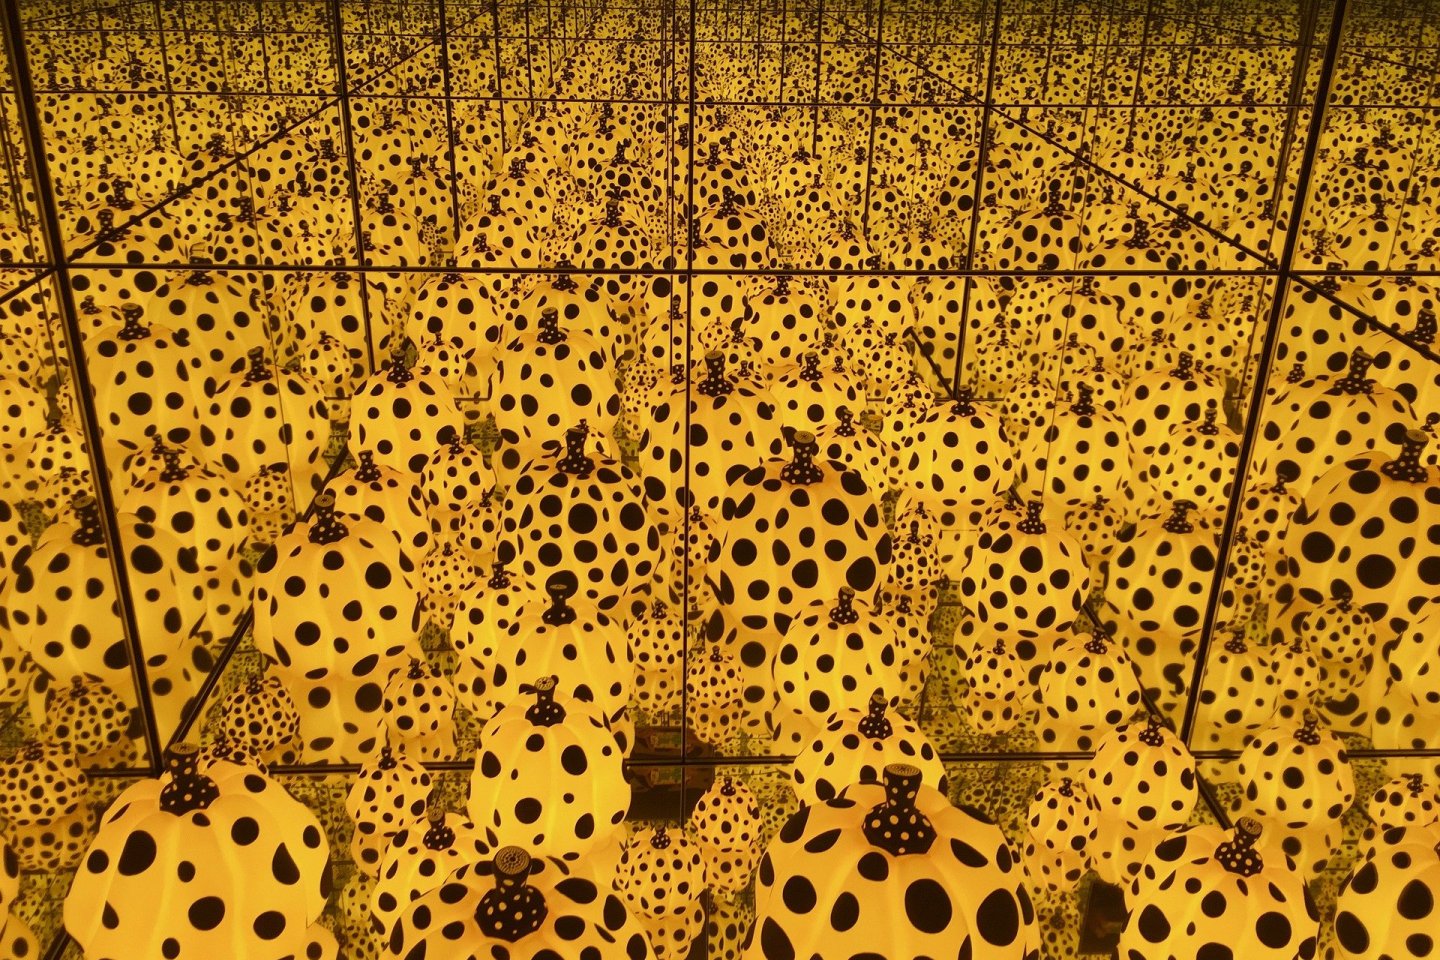 Yayoi Kusama is known for her range of monochromatic or two-color artworks